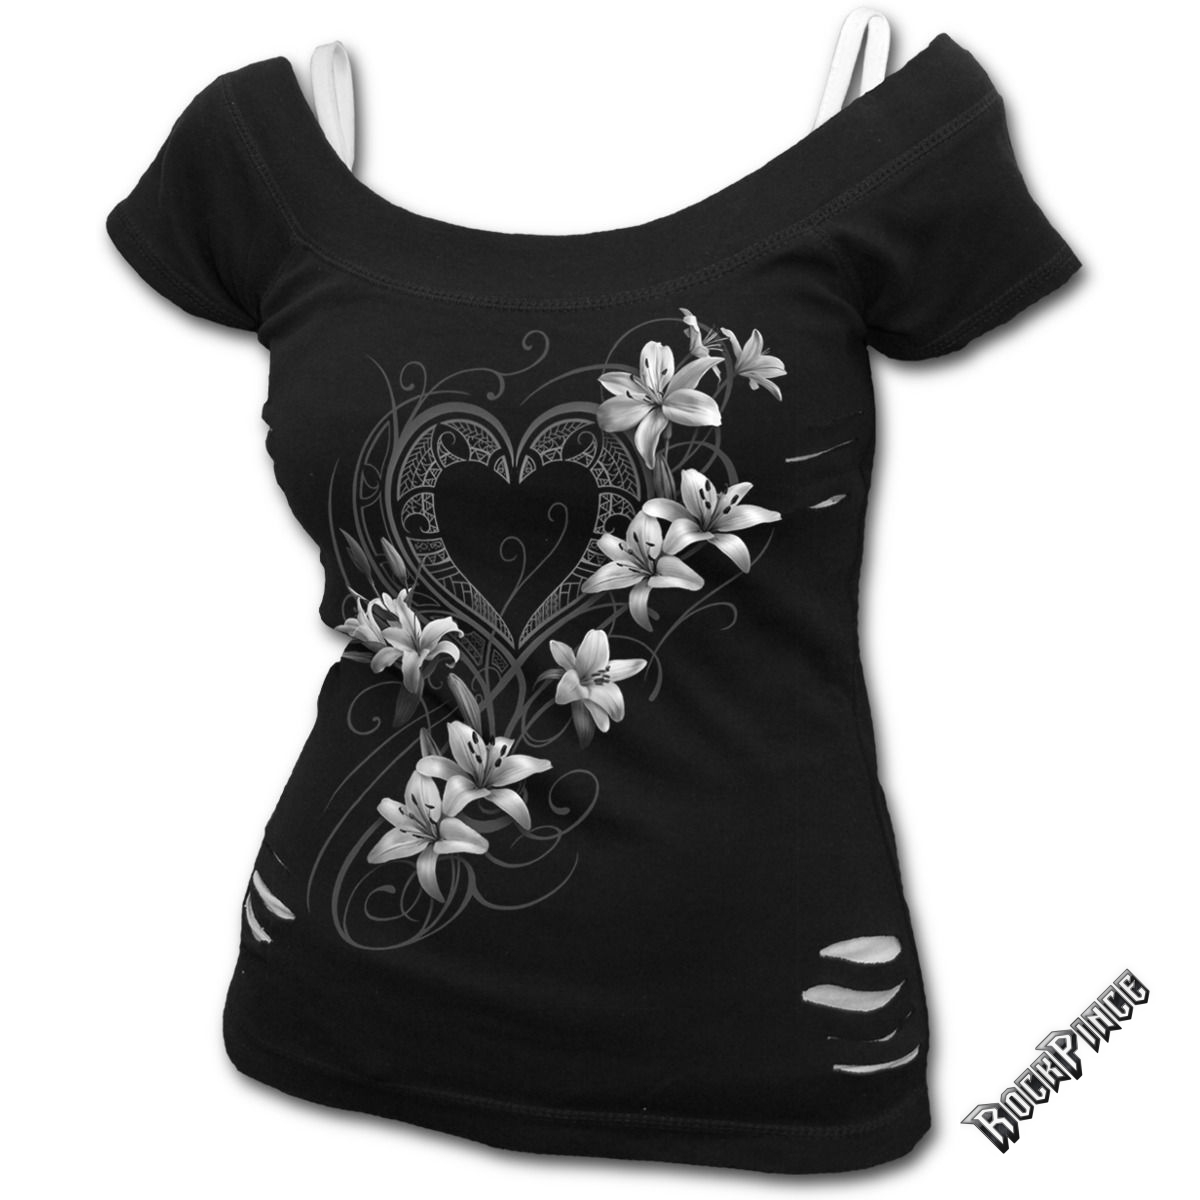 PURE OF HEART - 2in1 White Ripped Top Black (Plain) - F029F710